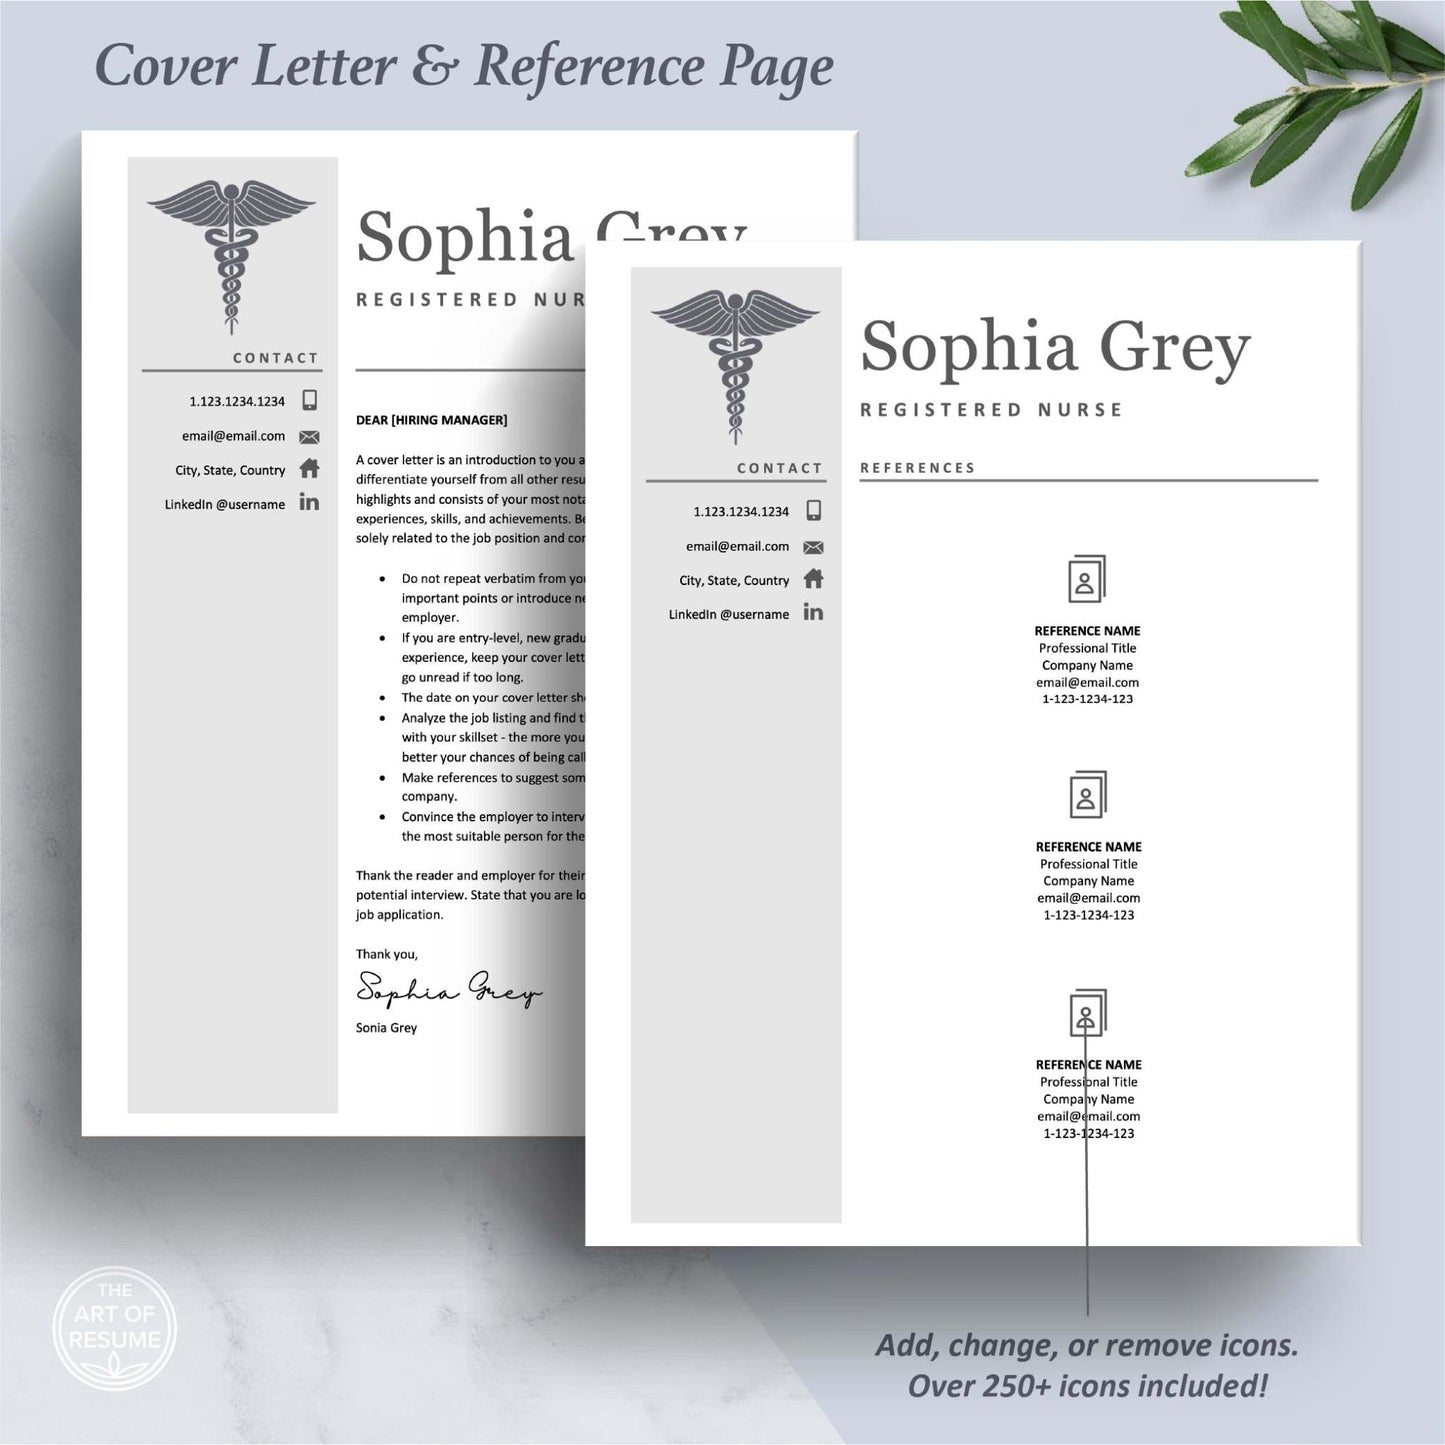 The Art of Resume Templates | Medical, Nurse, Doctor Cover Letter and Reference Page Templates Download